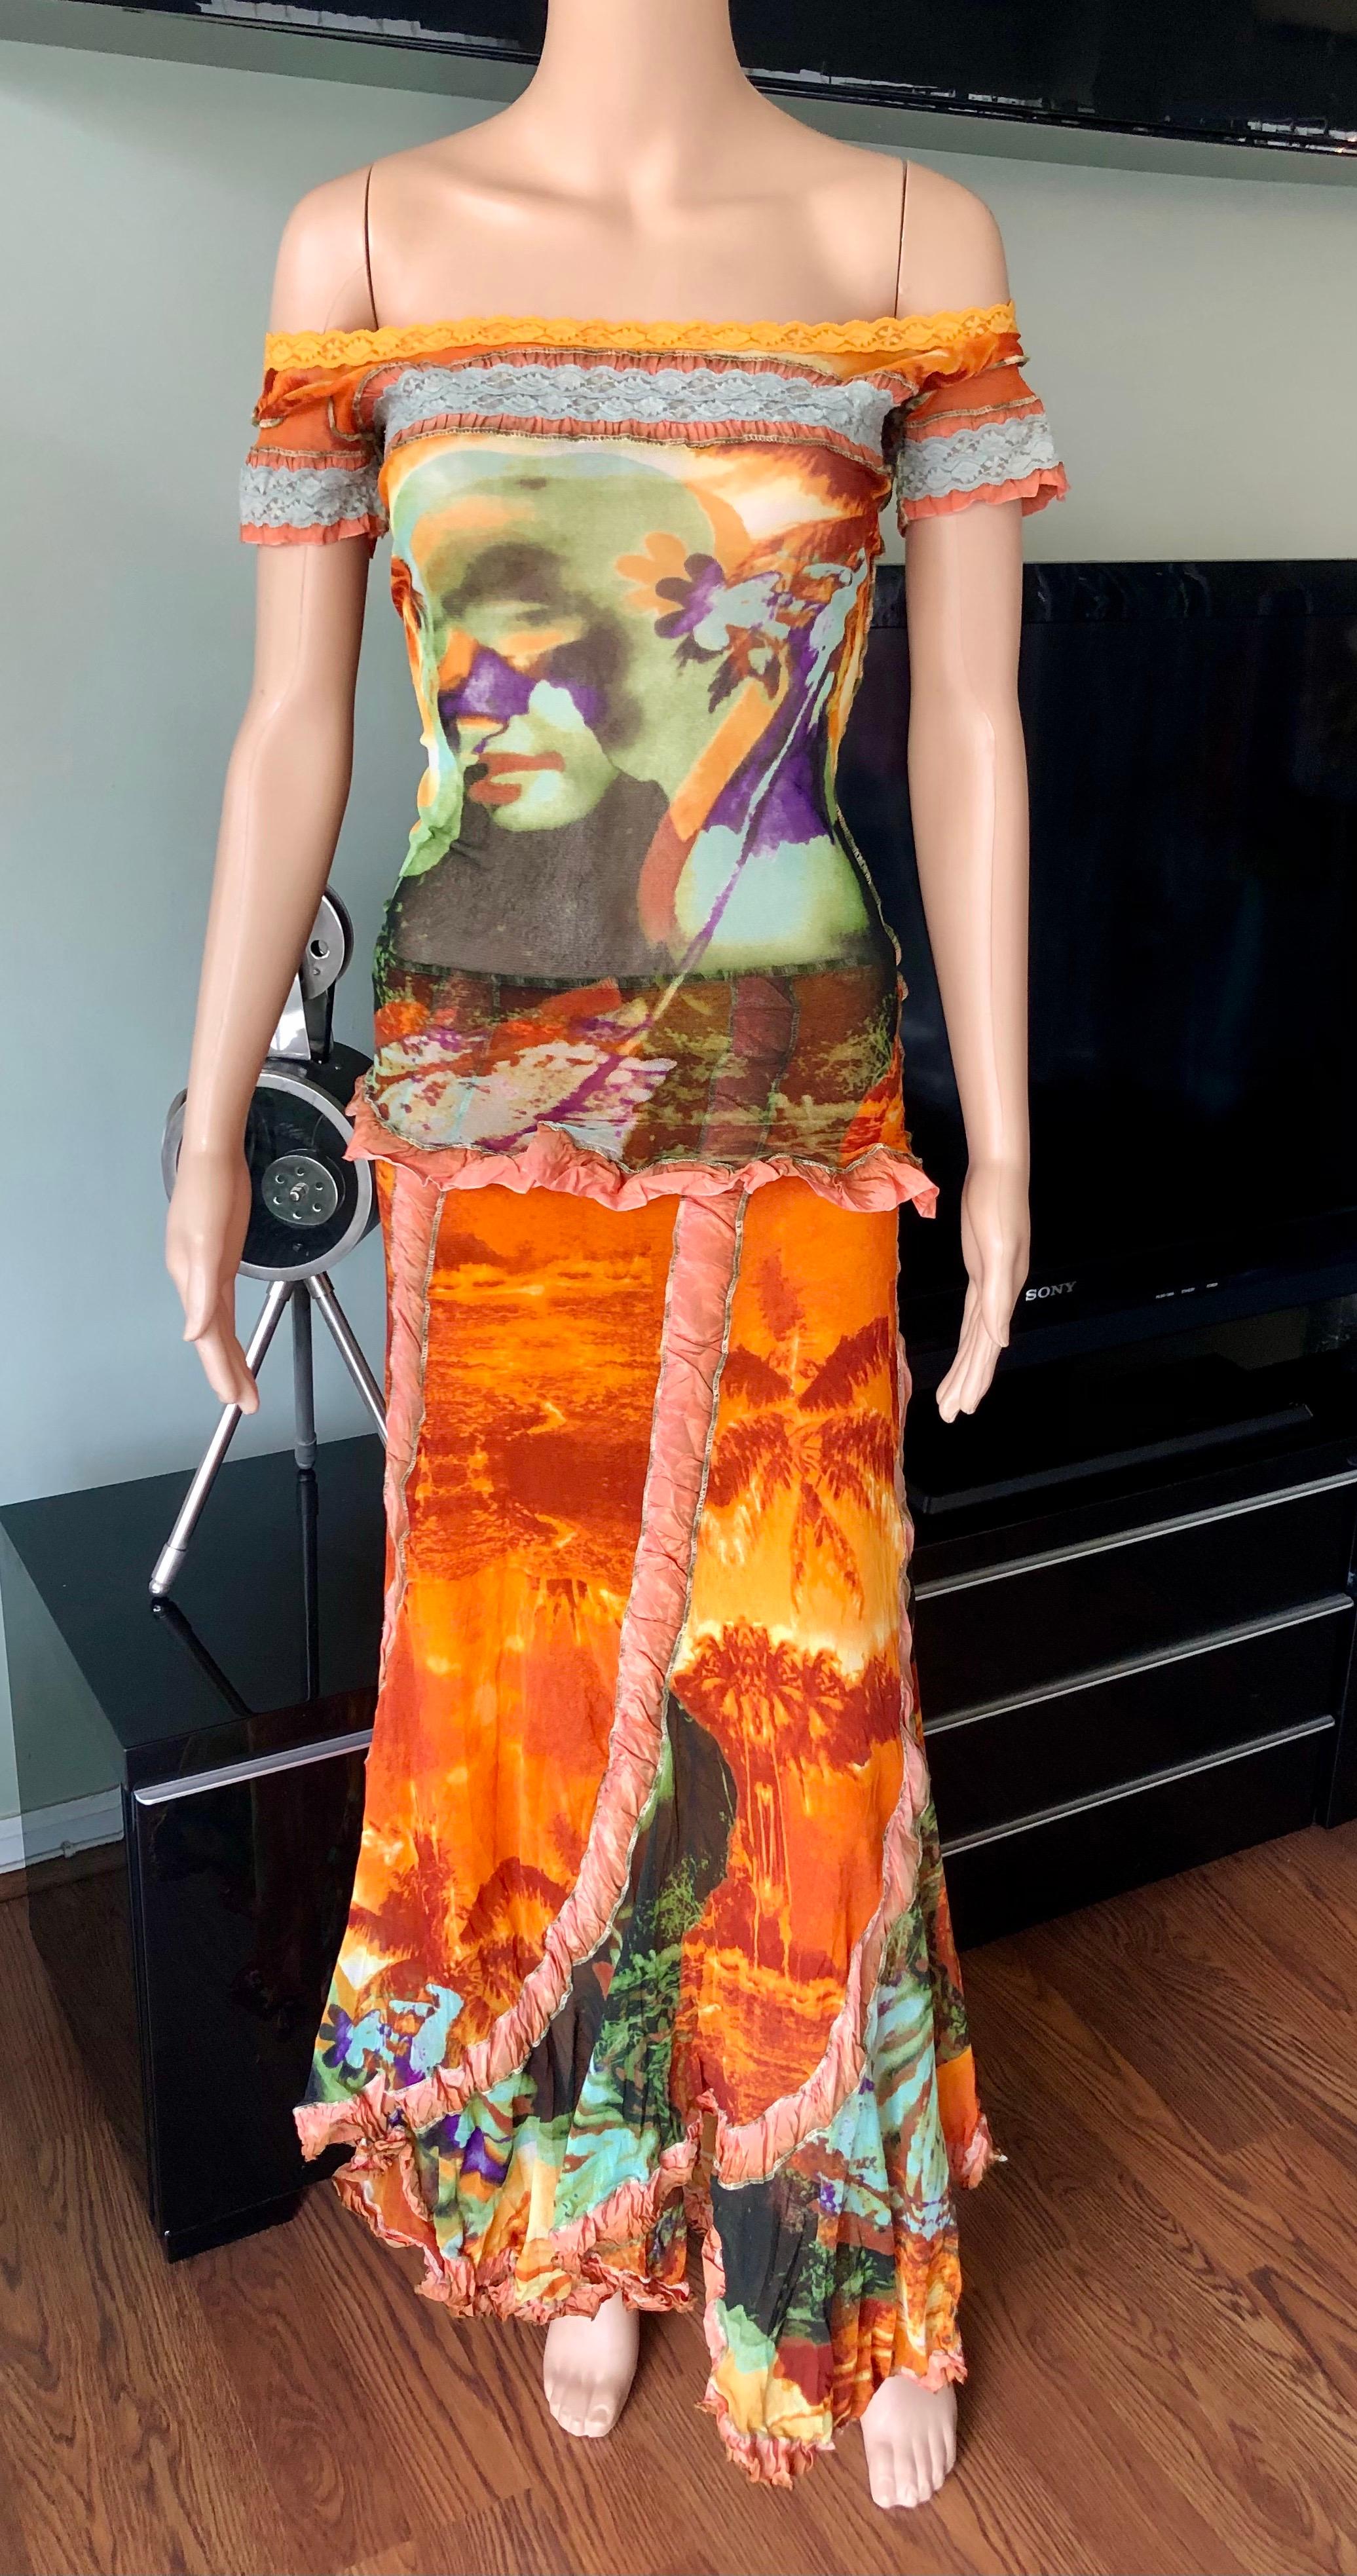 Jean Paul Gaultier S/S 2000 Abstract Psychedelic Print Mesh Top & Maxi Skirt Ensemble 2 Piece Set Size M

Please note the size tag on the skirt has been removed and the top is M.

